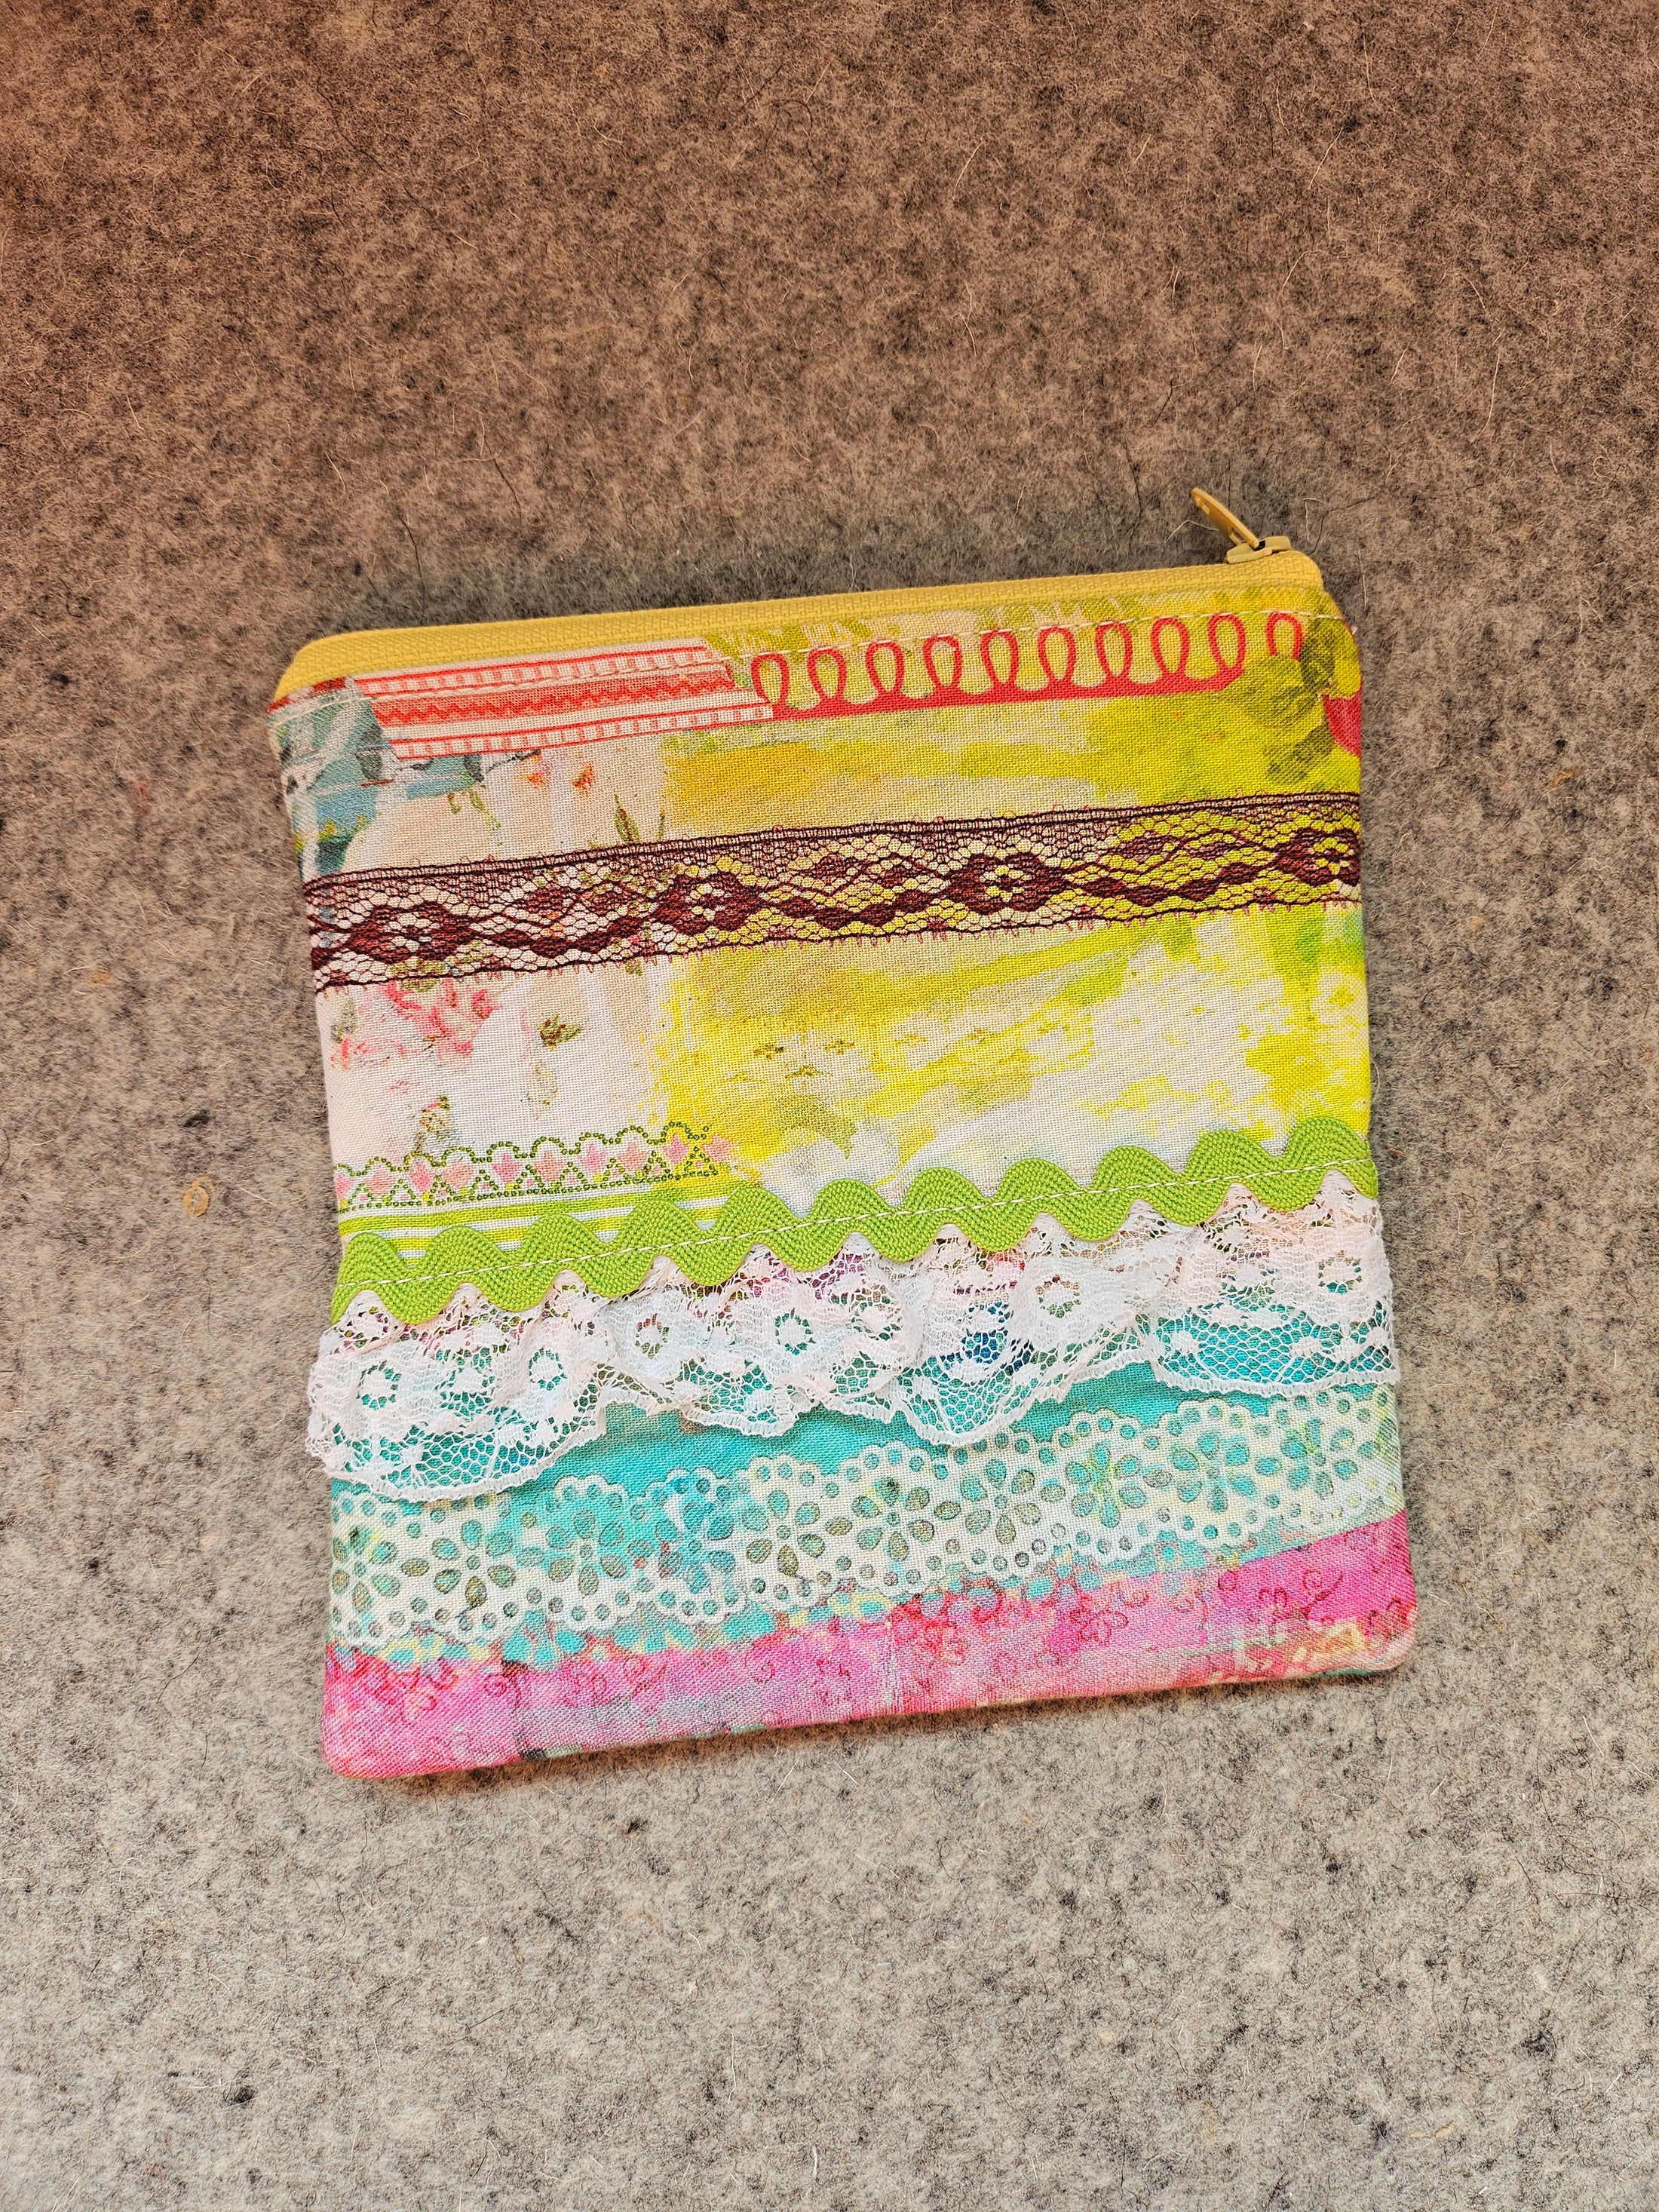 Watercolor lace zipper pouch with yellow zipper.